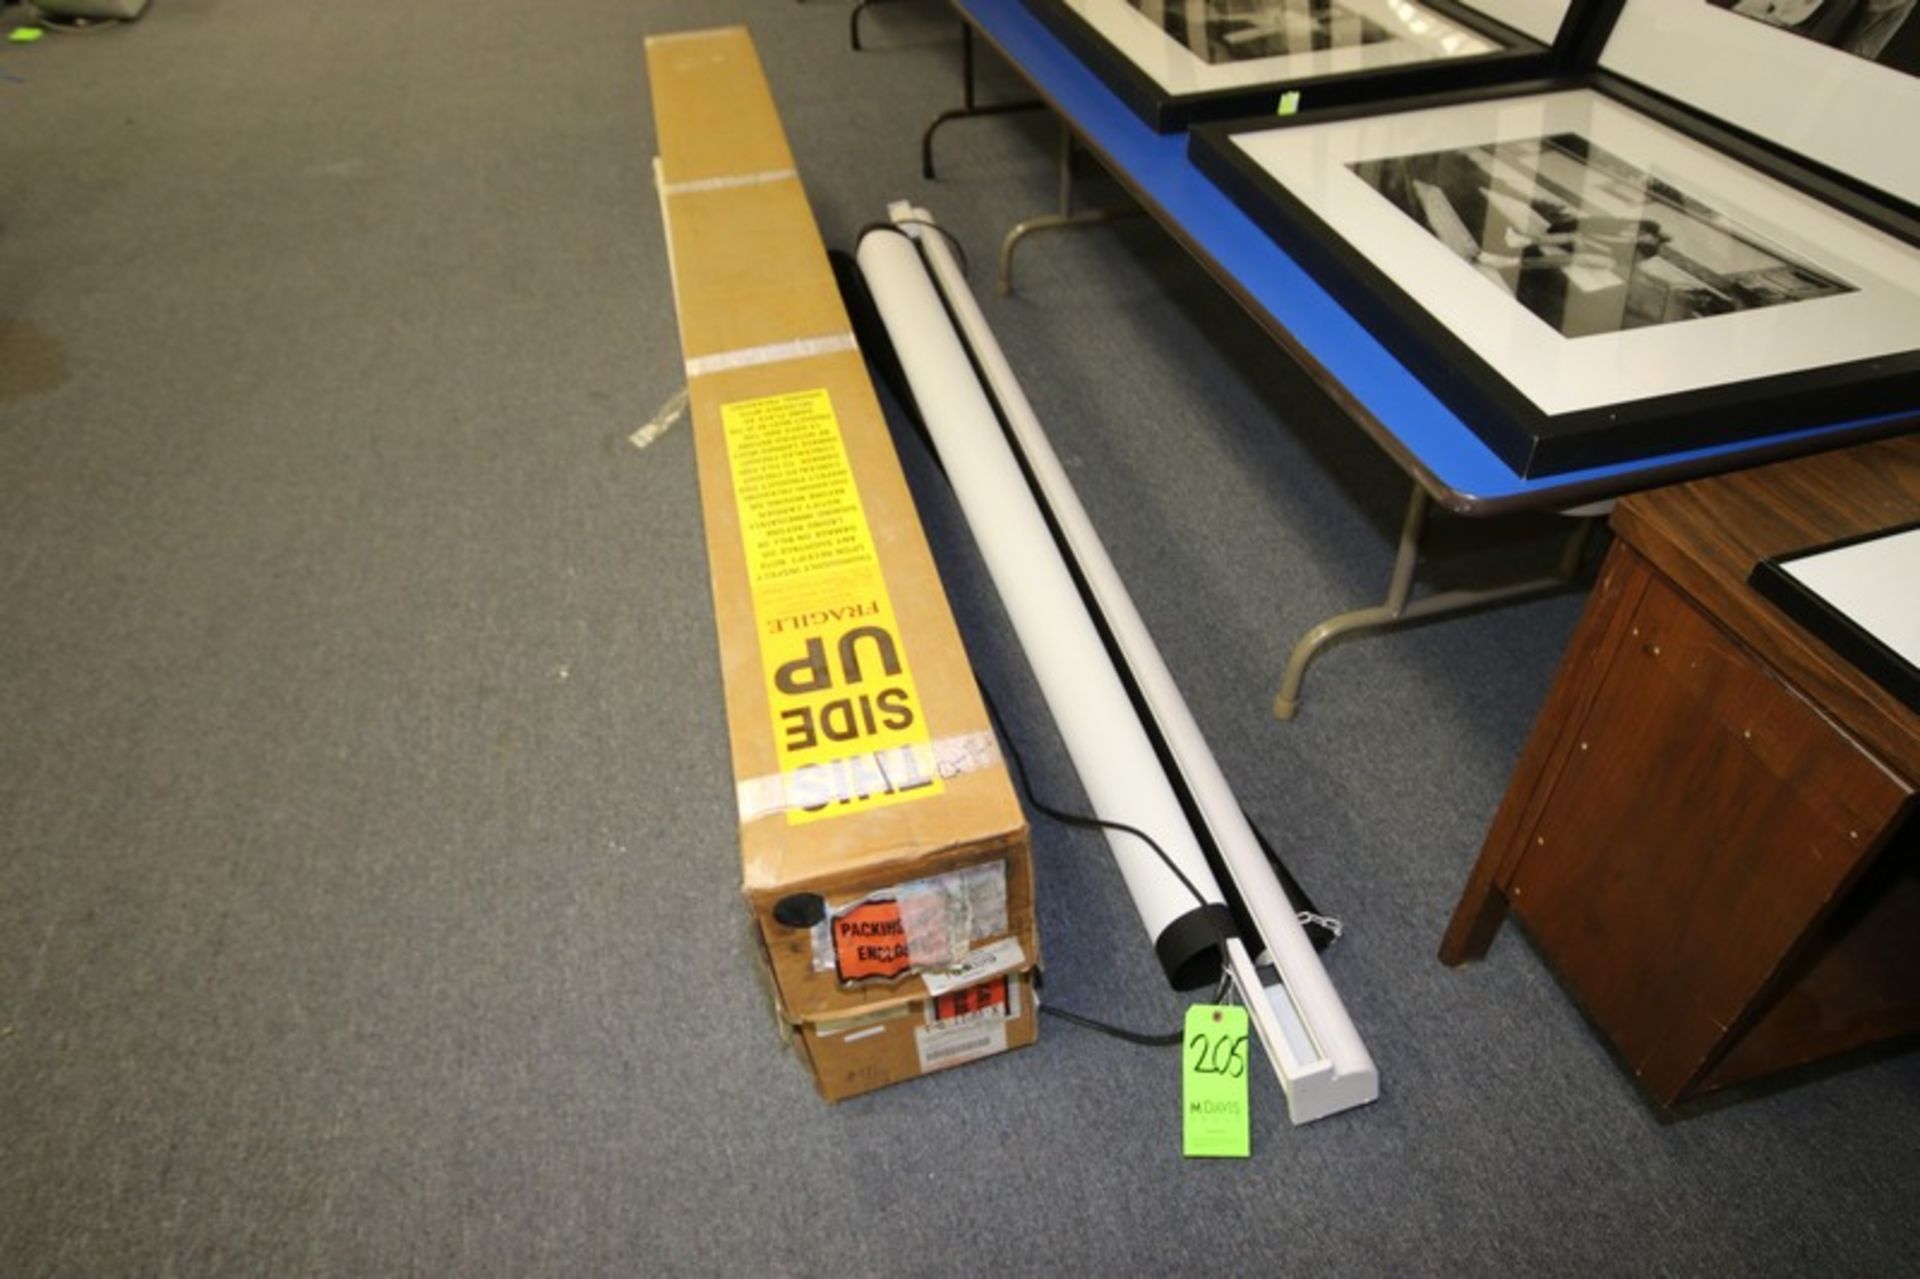 Projector Screens in Boxes including Da-Lite electric projection screen, Approx. 84" wide